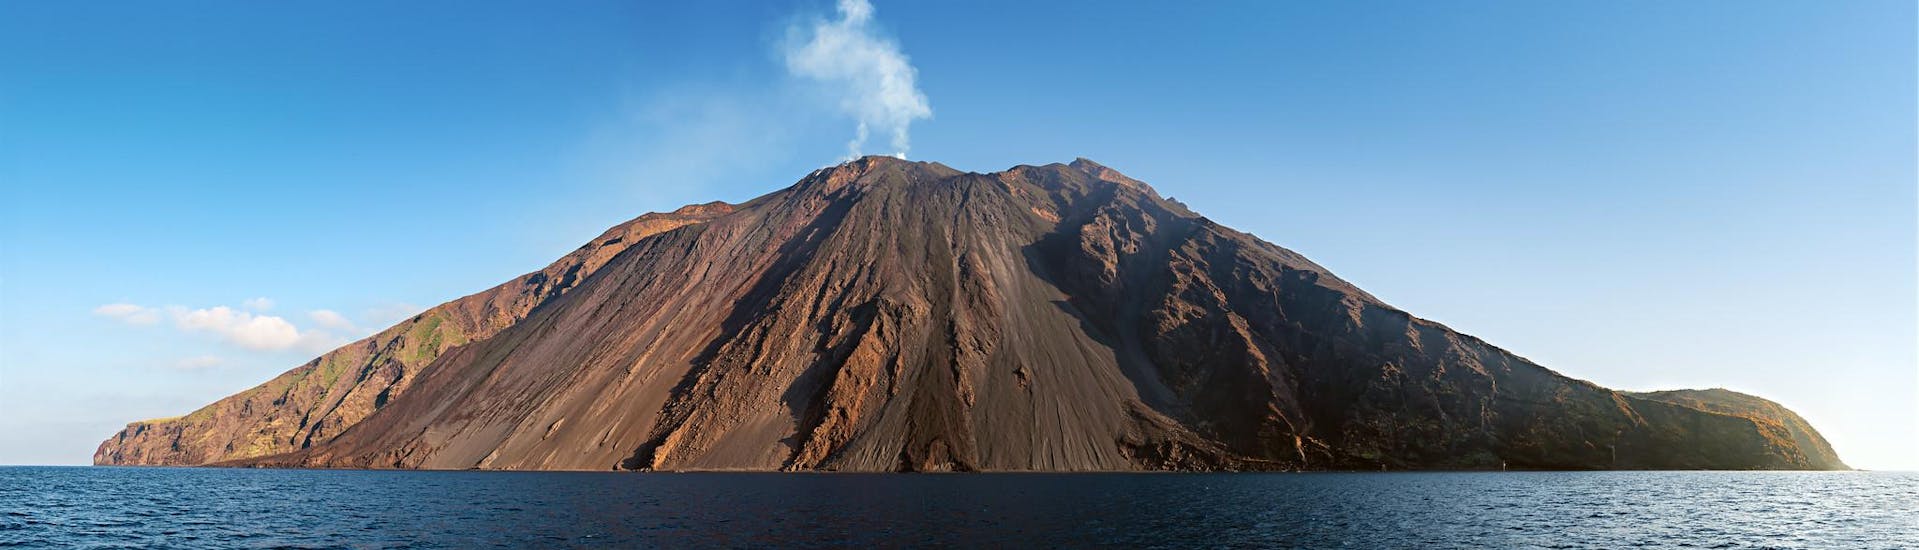 Take a boat trip and visit a volcano